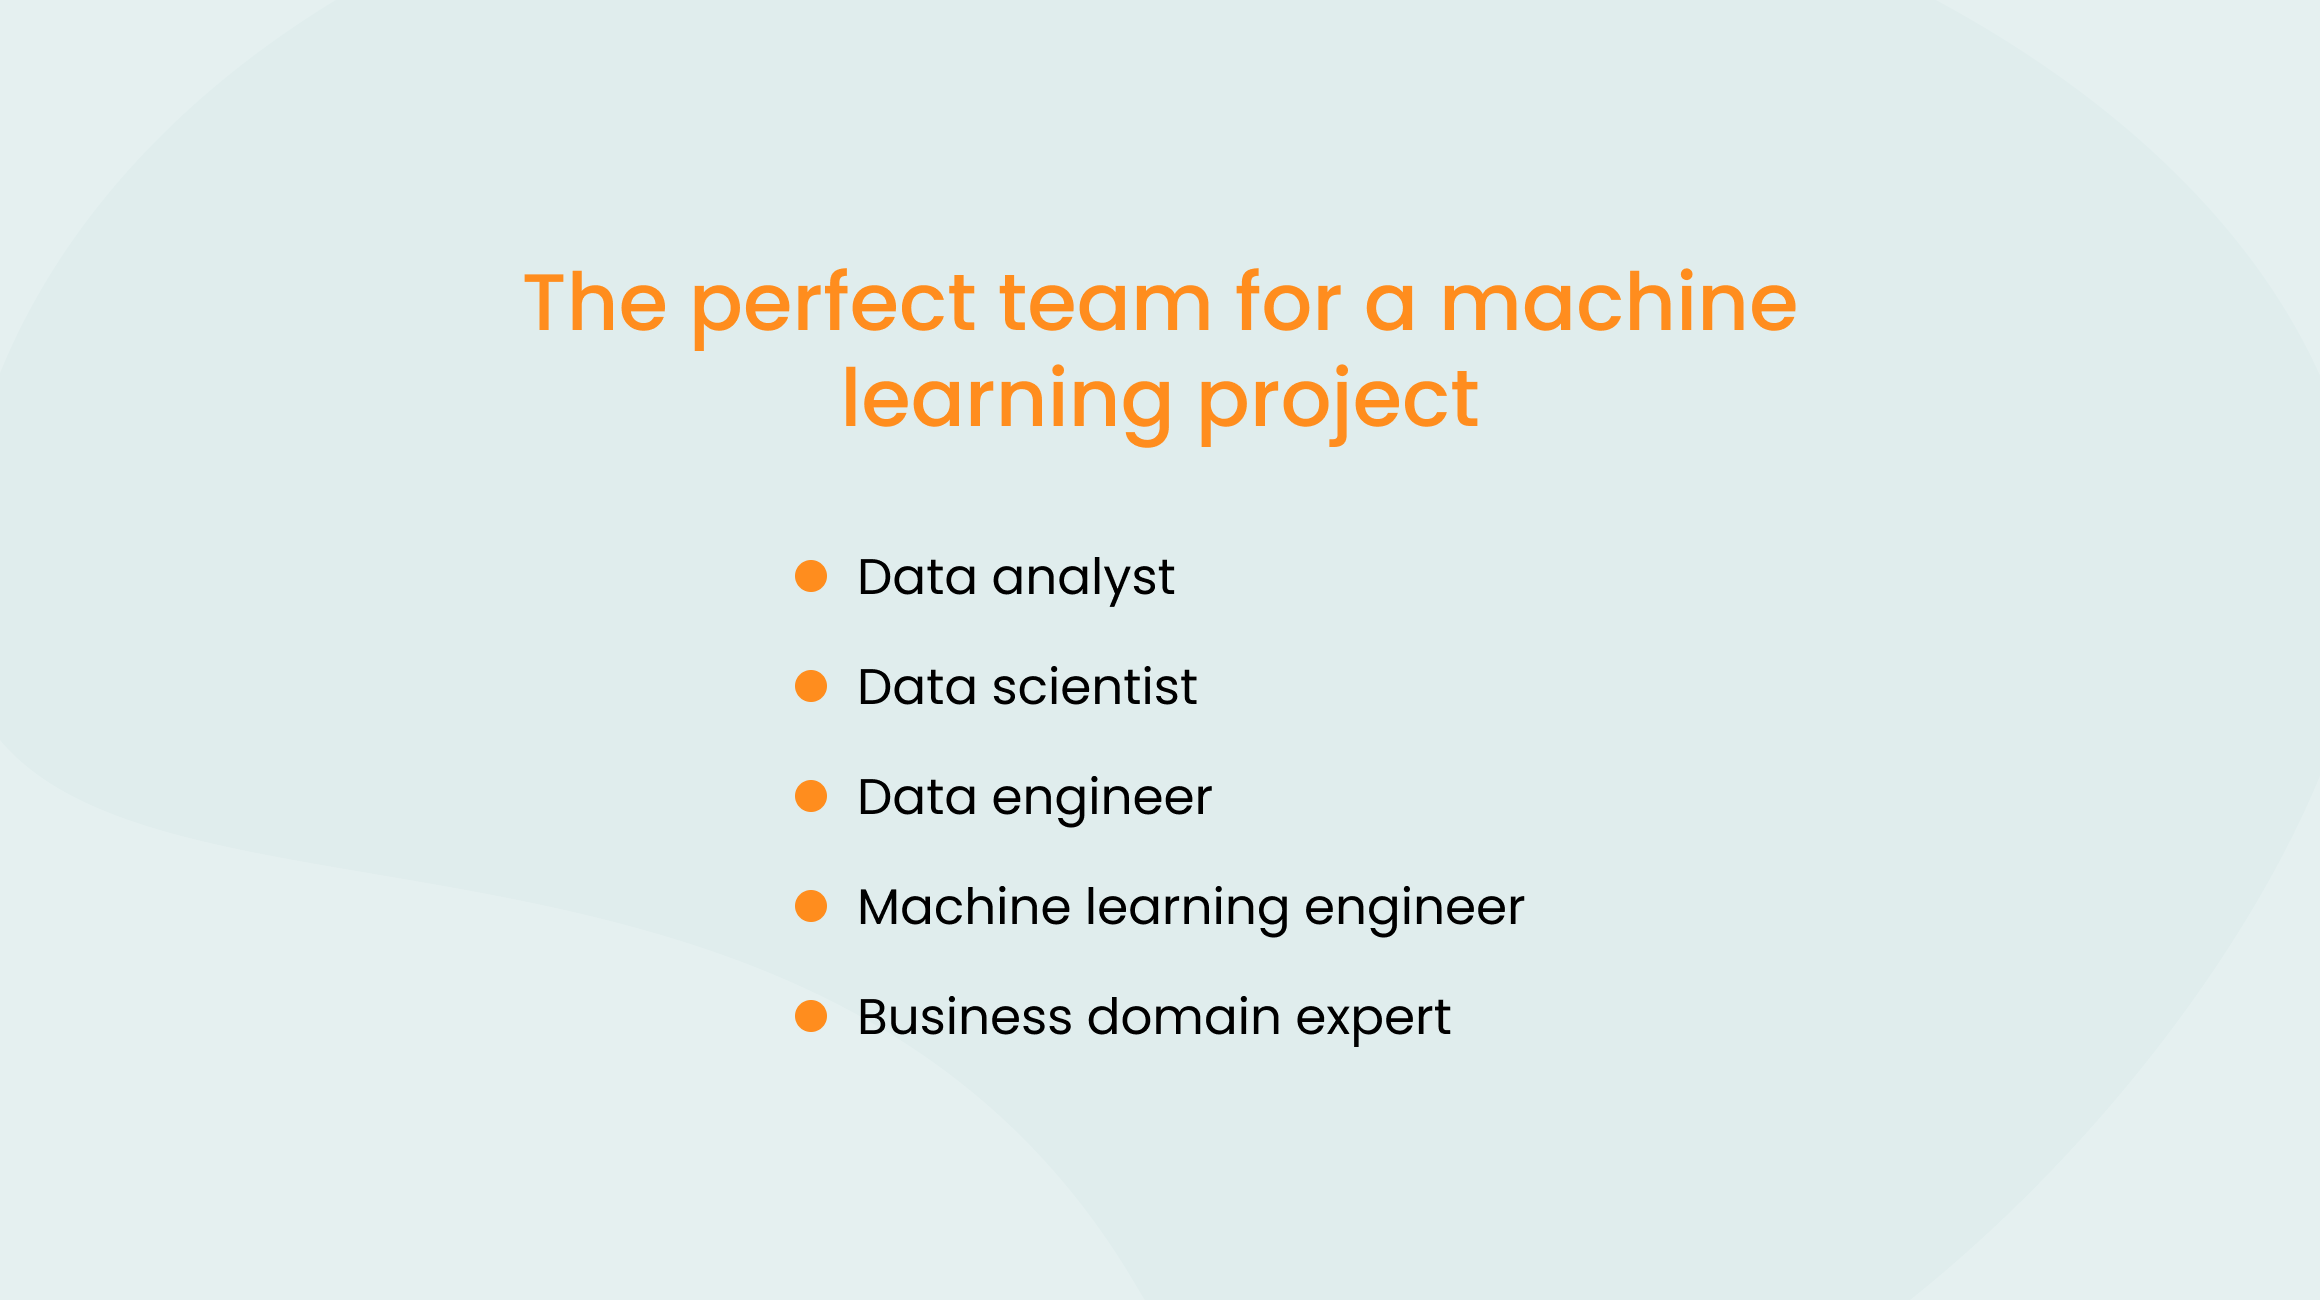 The perfect team for machine learning project